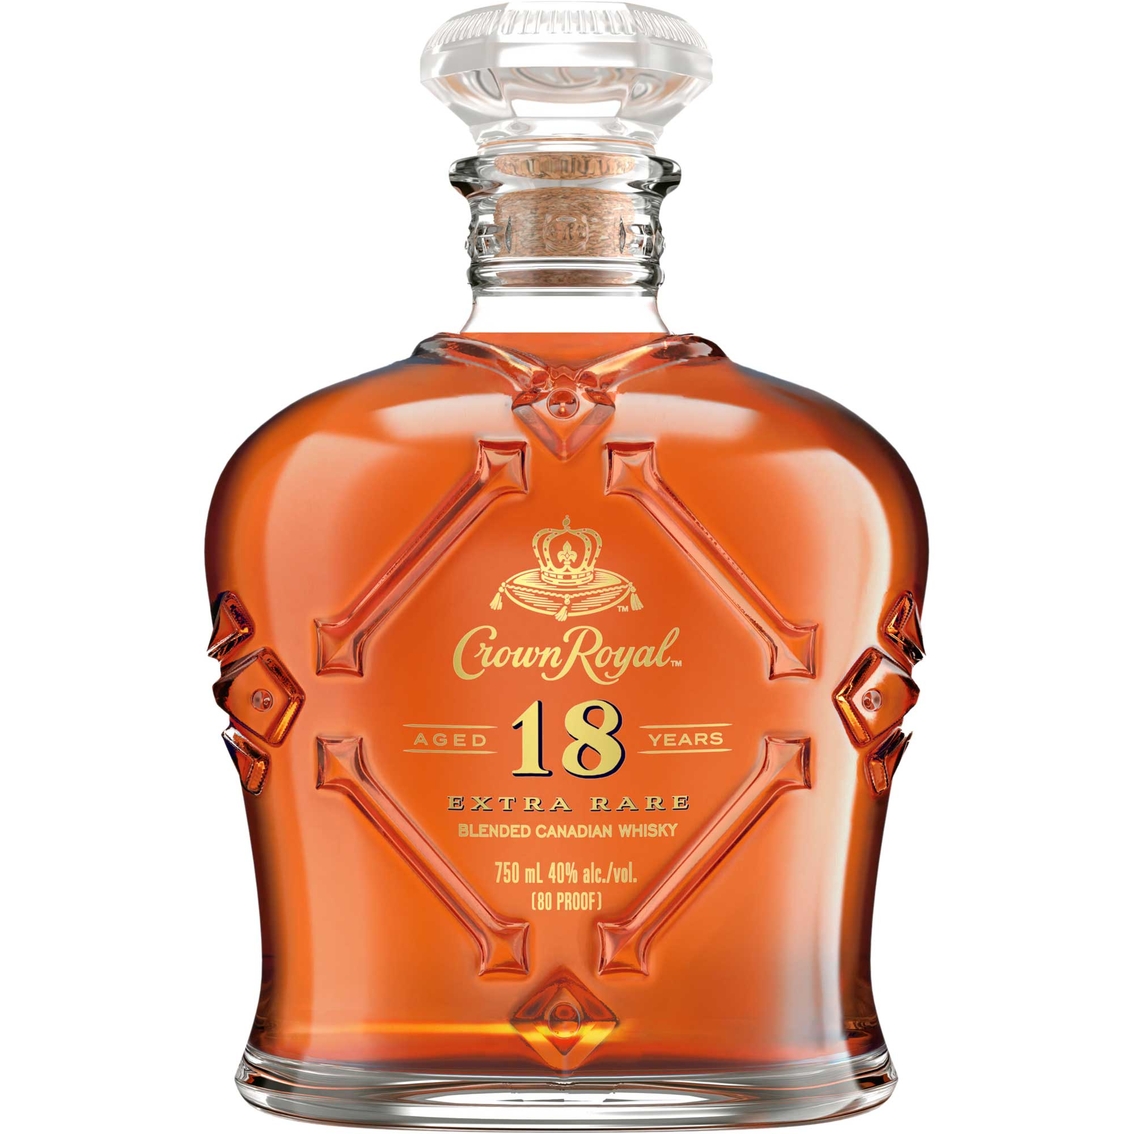 Crown Royal 18 Year Canadian Whiskey 750ml - Image 2 of 3